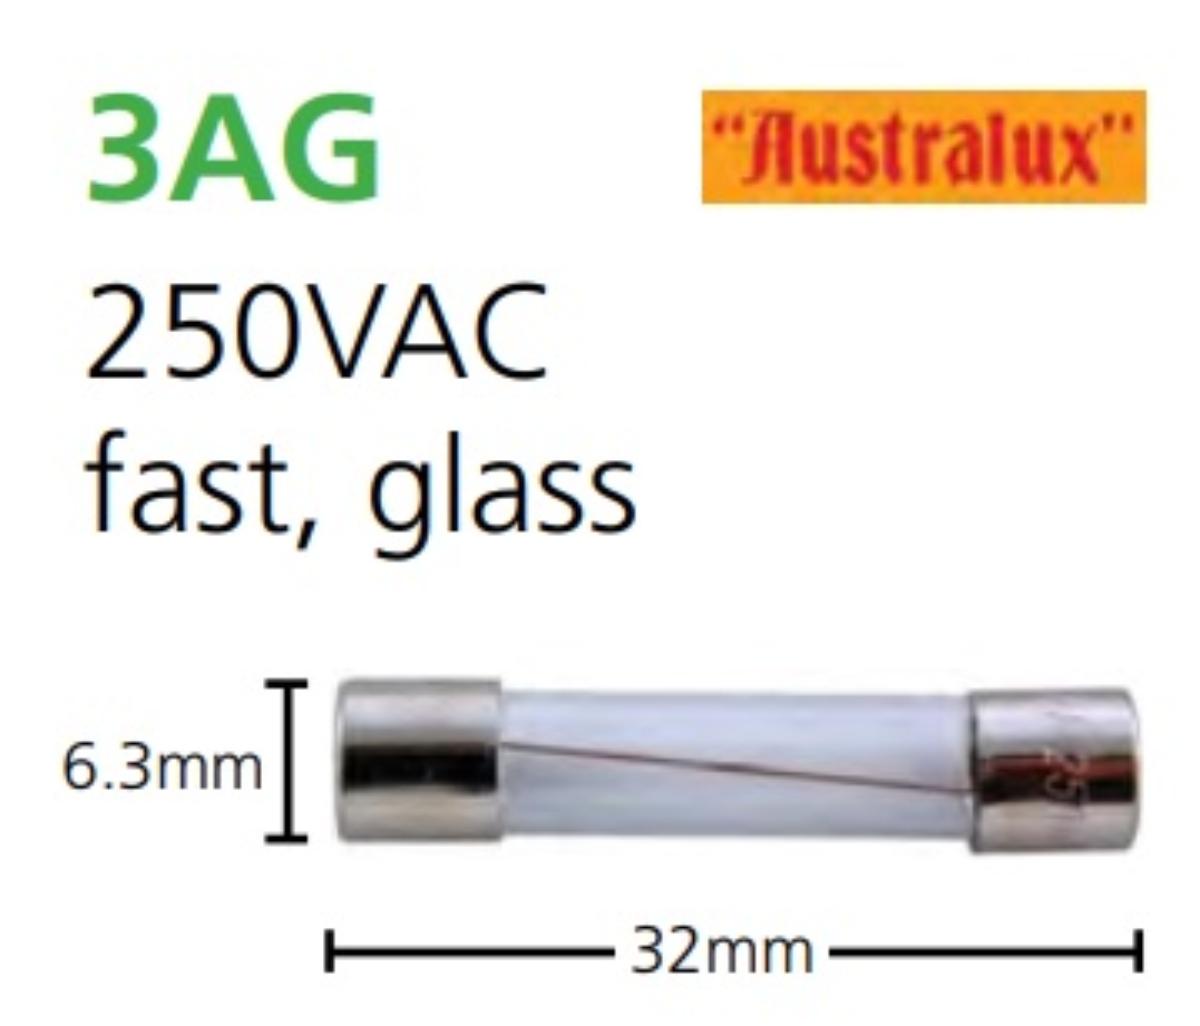 3AG GLASS FUSE FAST 250V 5A 32X6.3MM